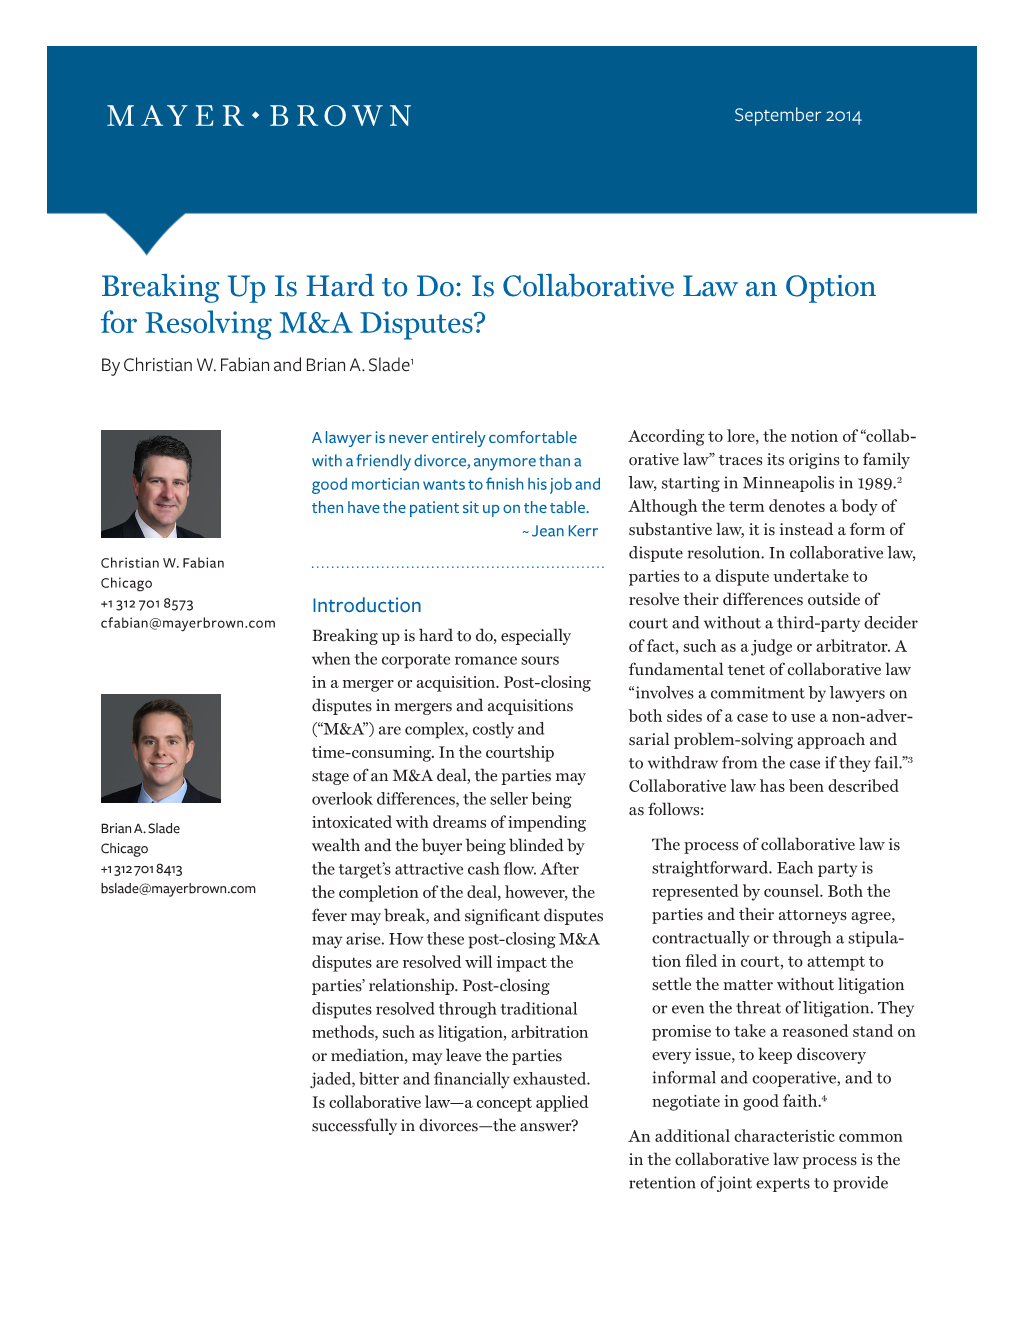 Is Collaborative Law an Option for Resolving M&A Disputes?